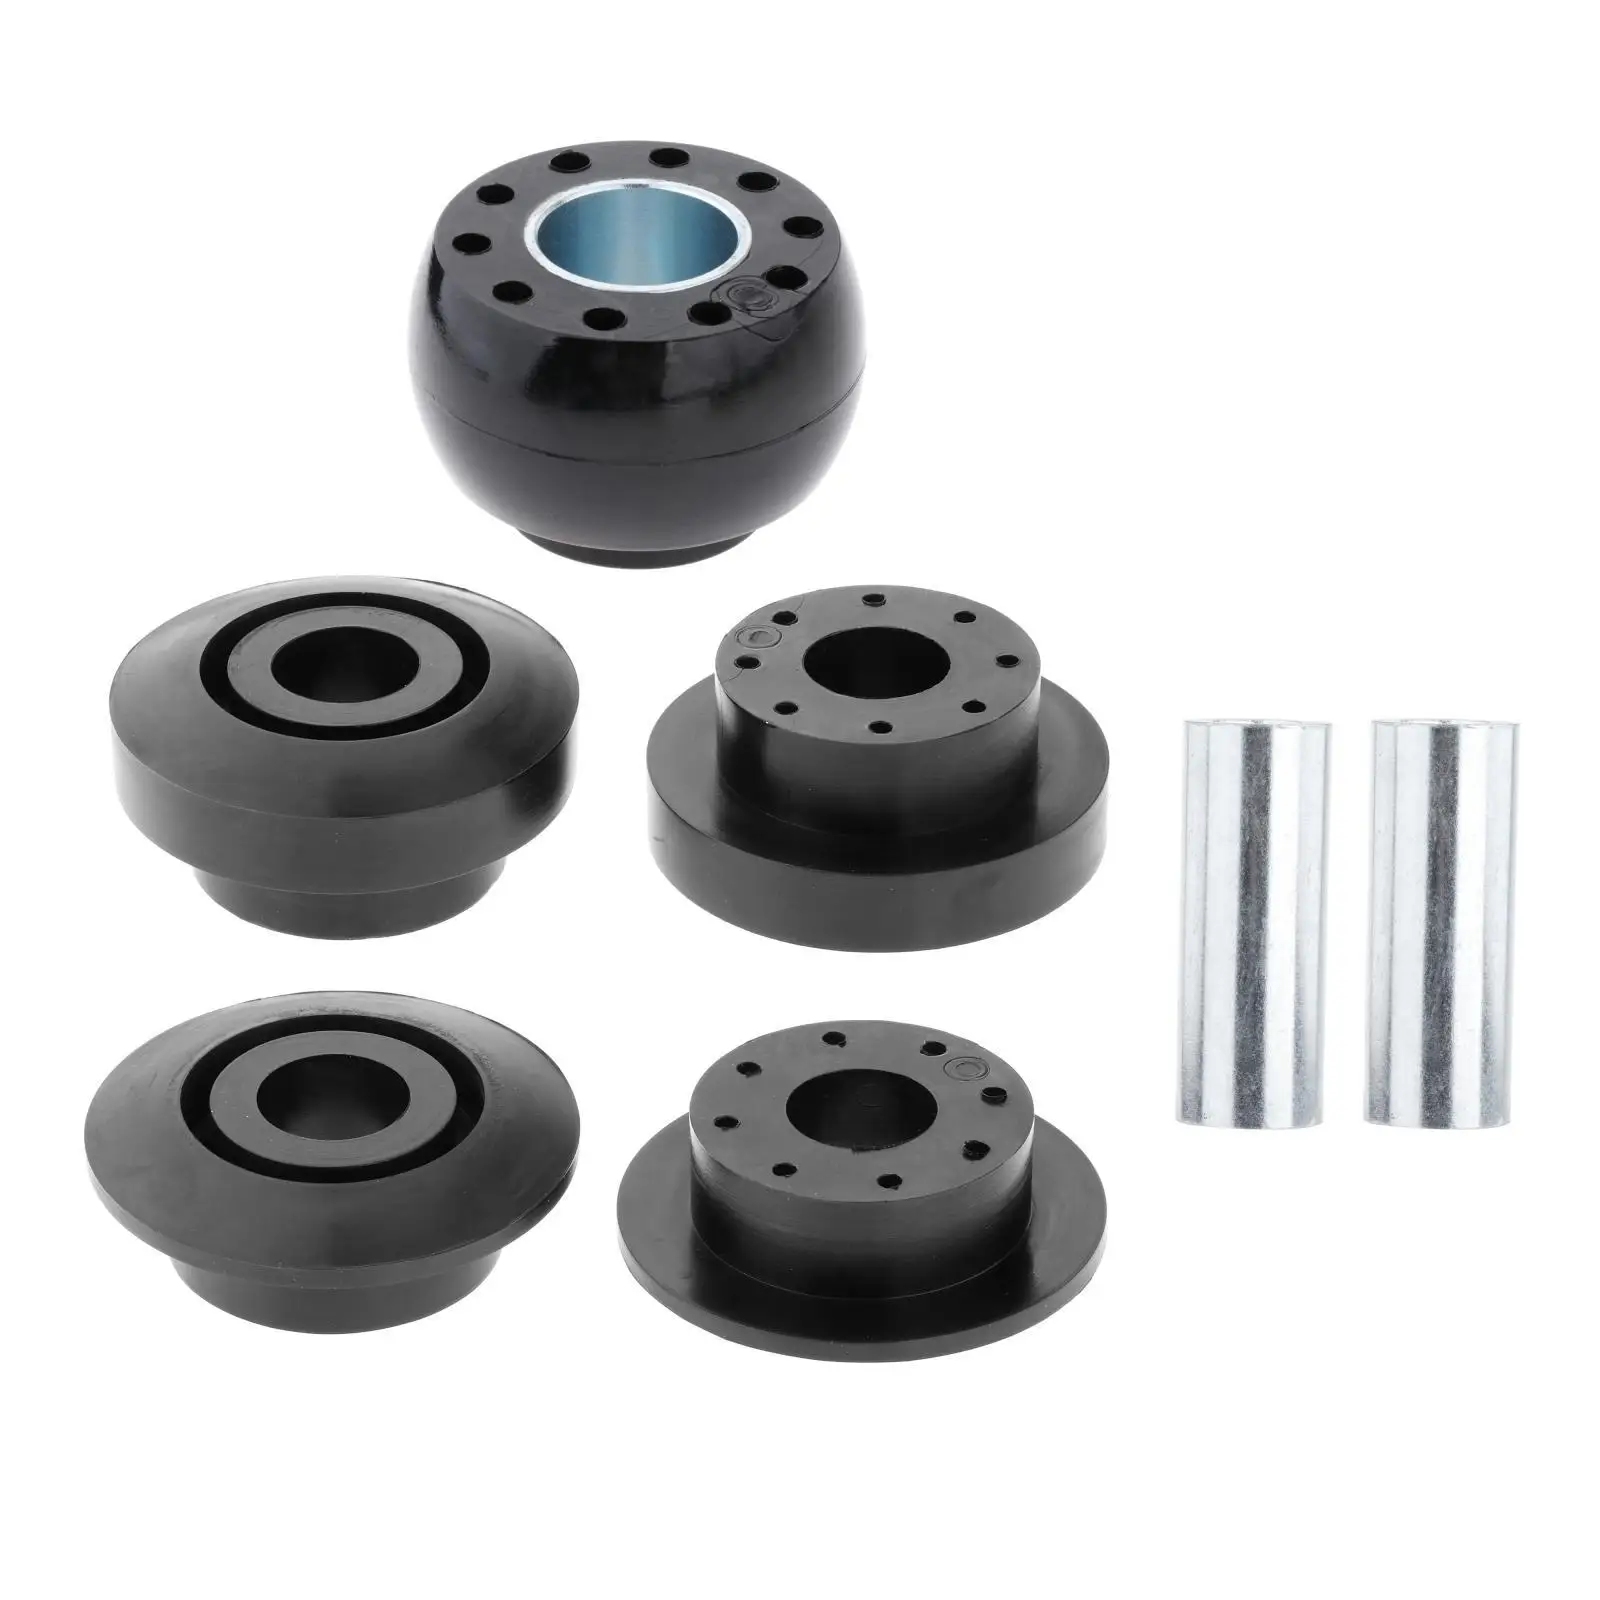 Solid Rear Differential Mount Bushings KDT911 Fit for 350Z 370Z G35 G37